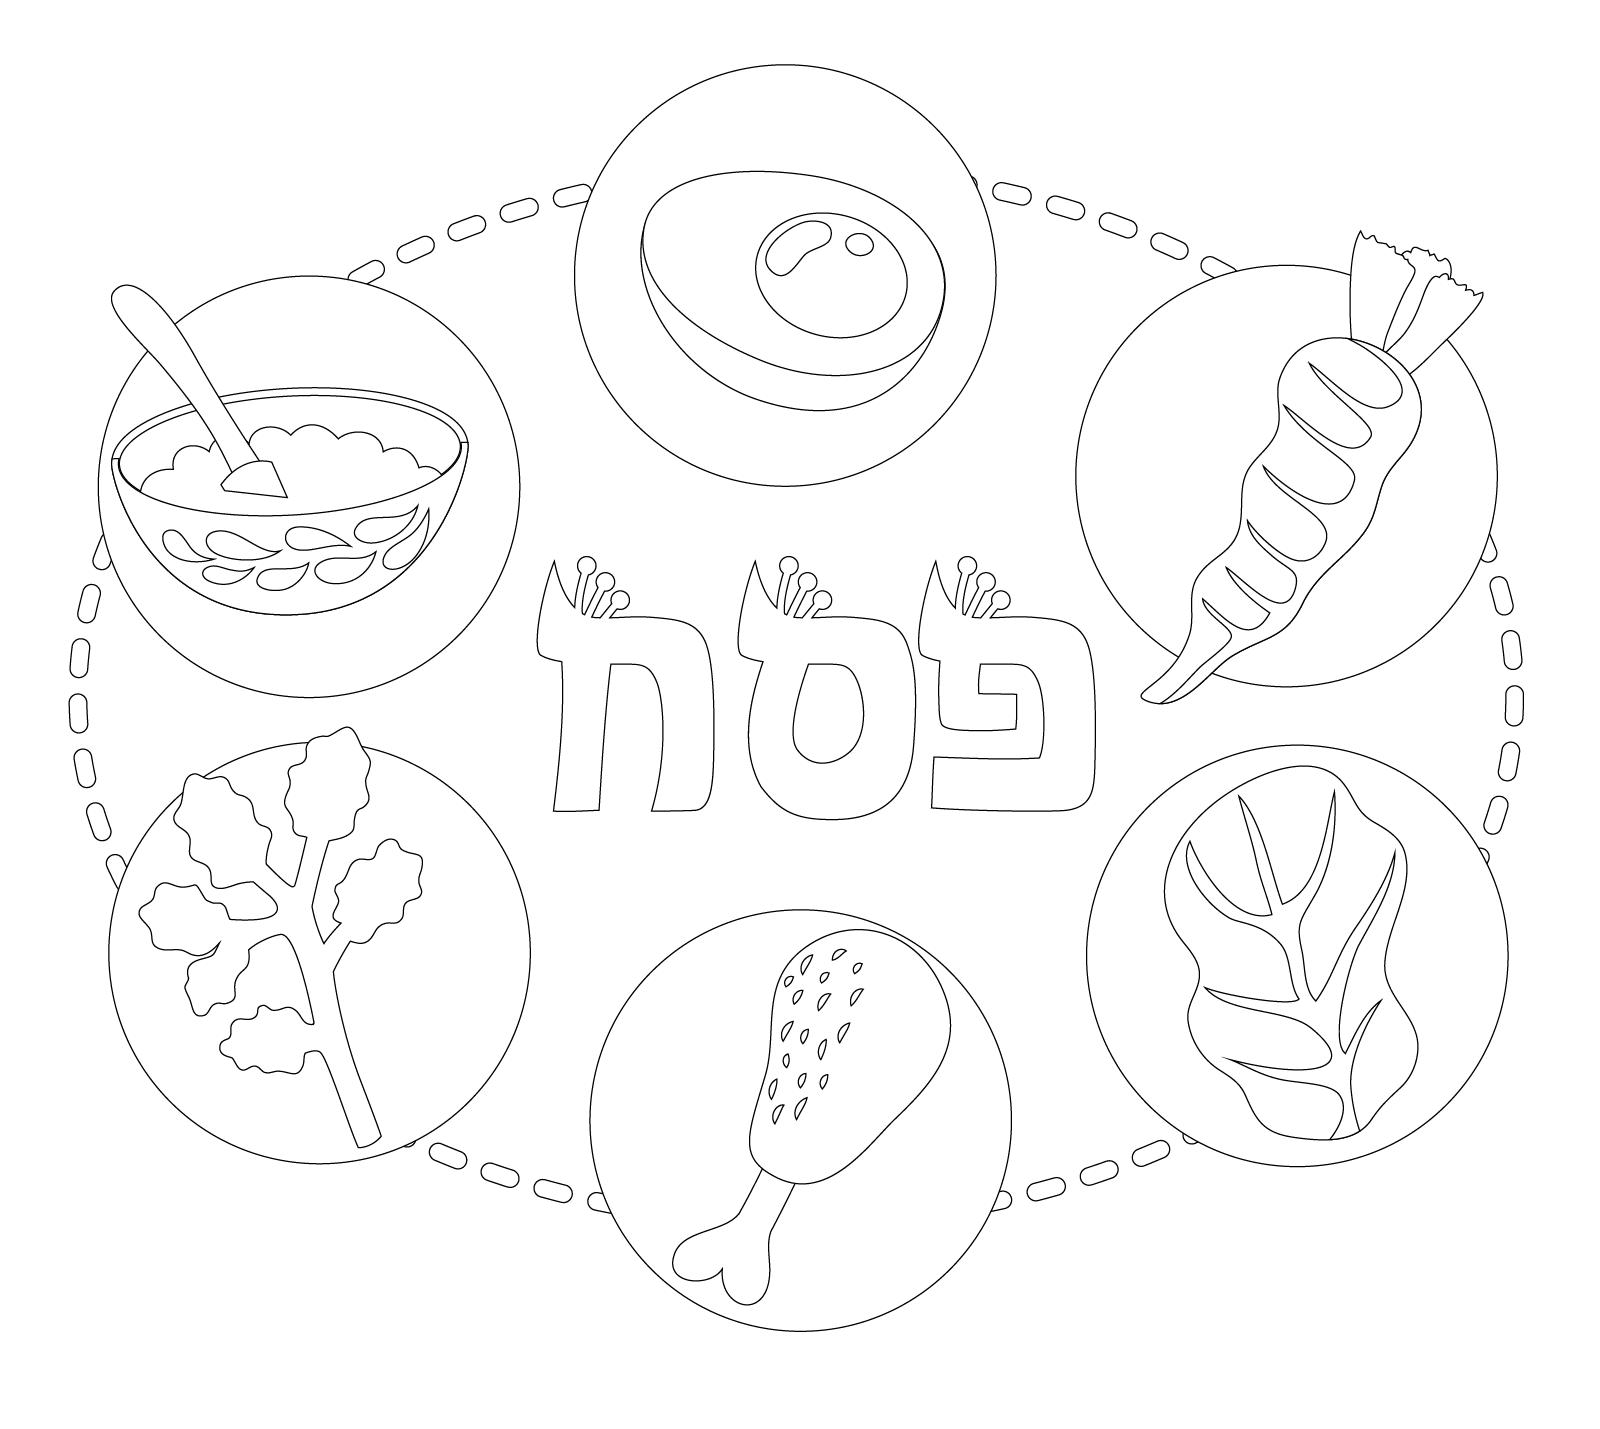 Seder Plate Coloring Pages at Free printable